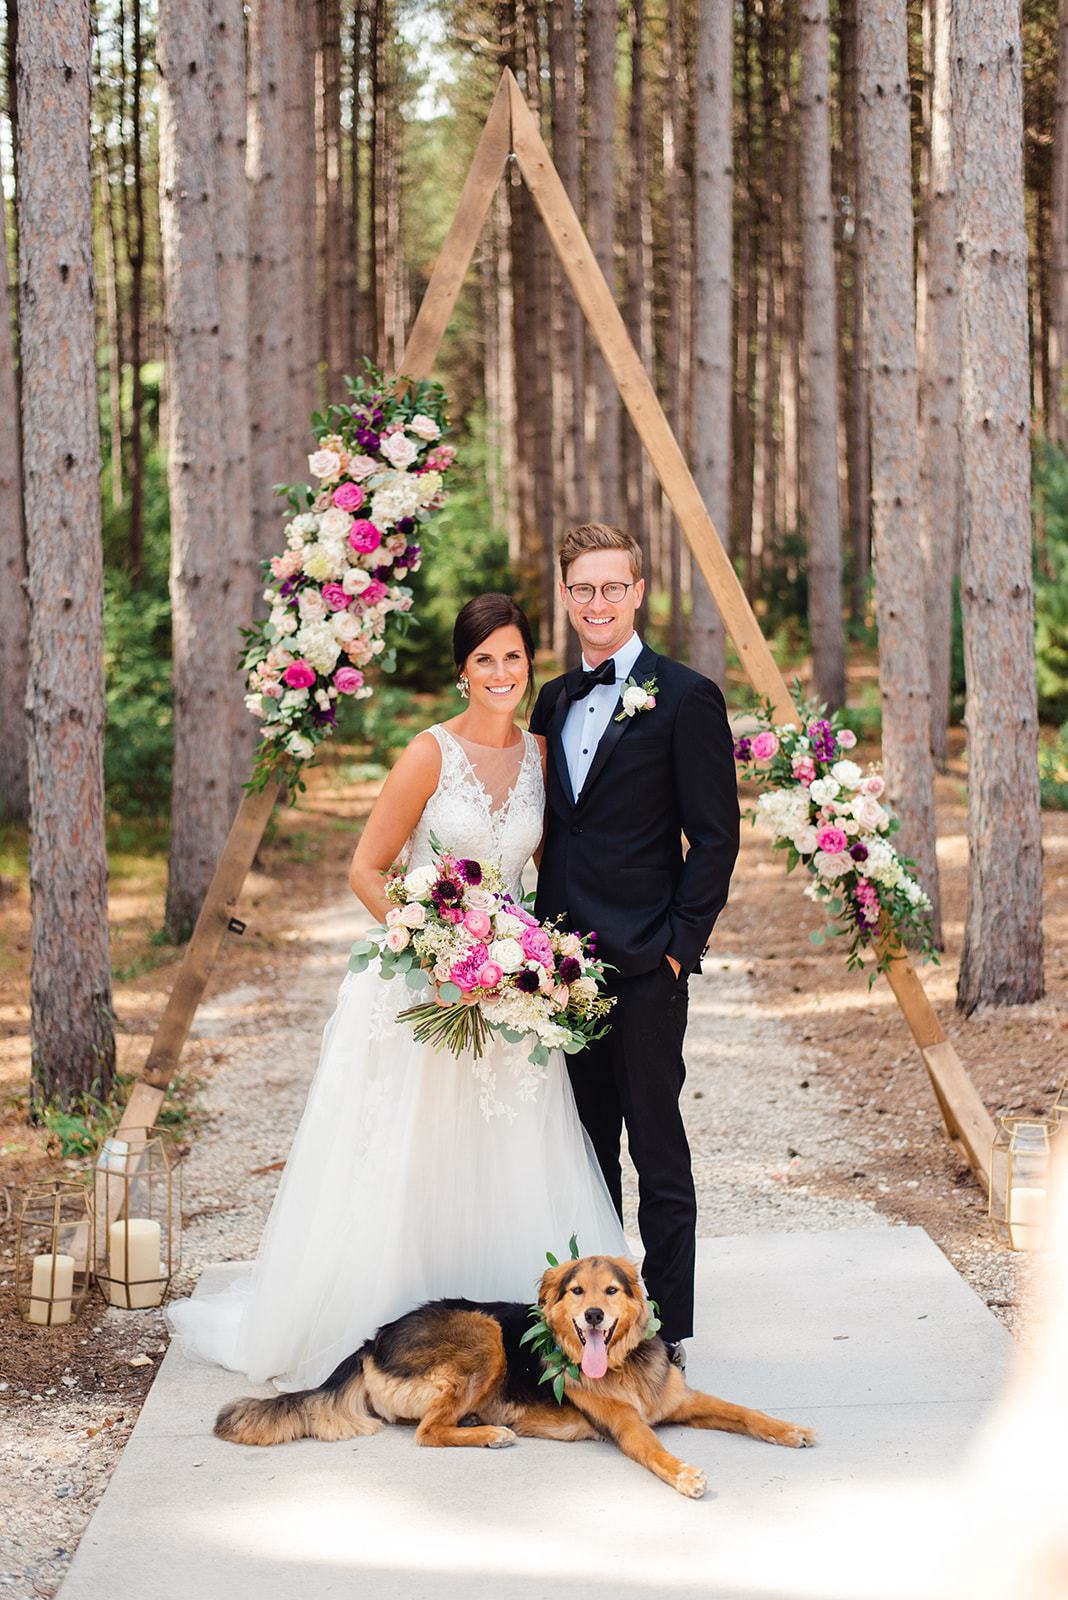 Newlyweds stand under their arbor in front of a path through pine trees with their dog laying at their feet